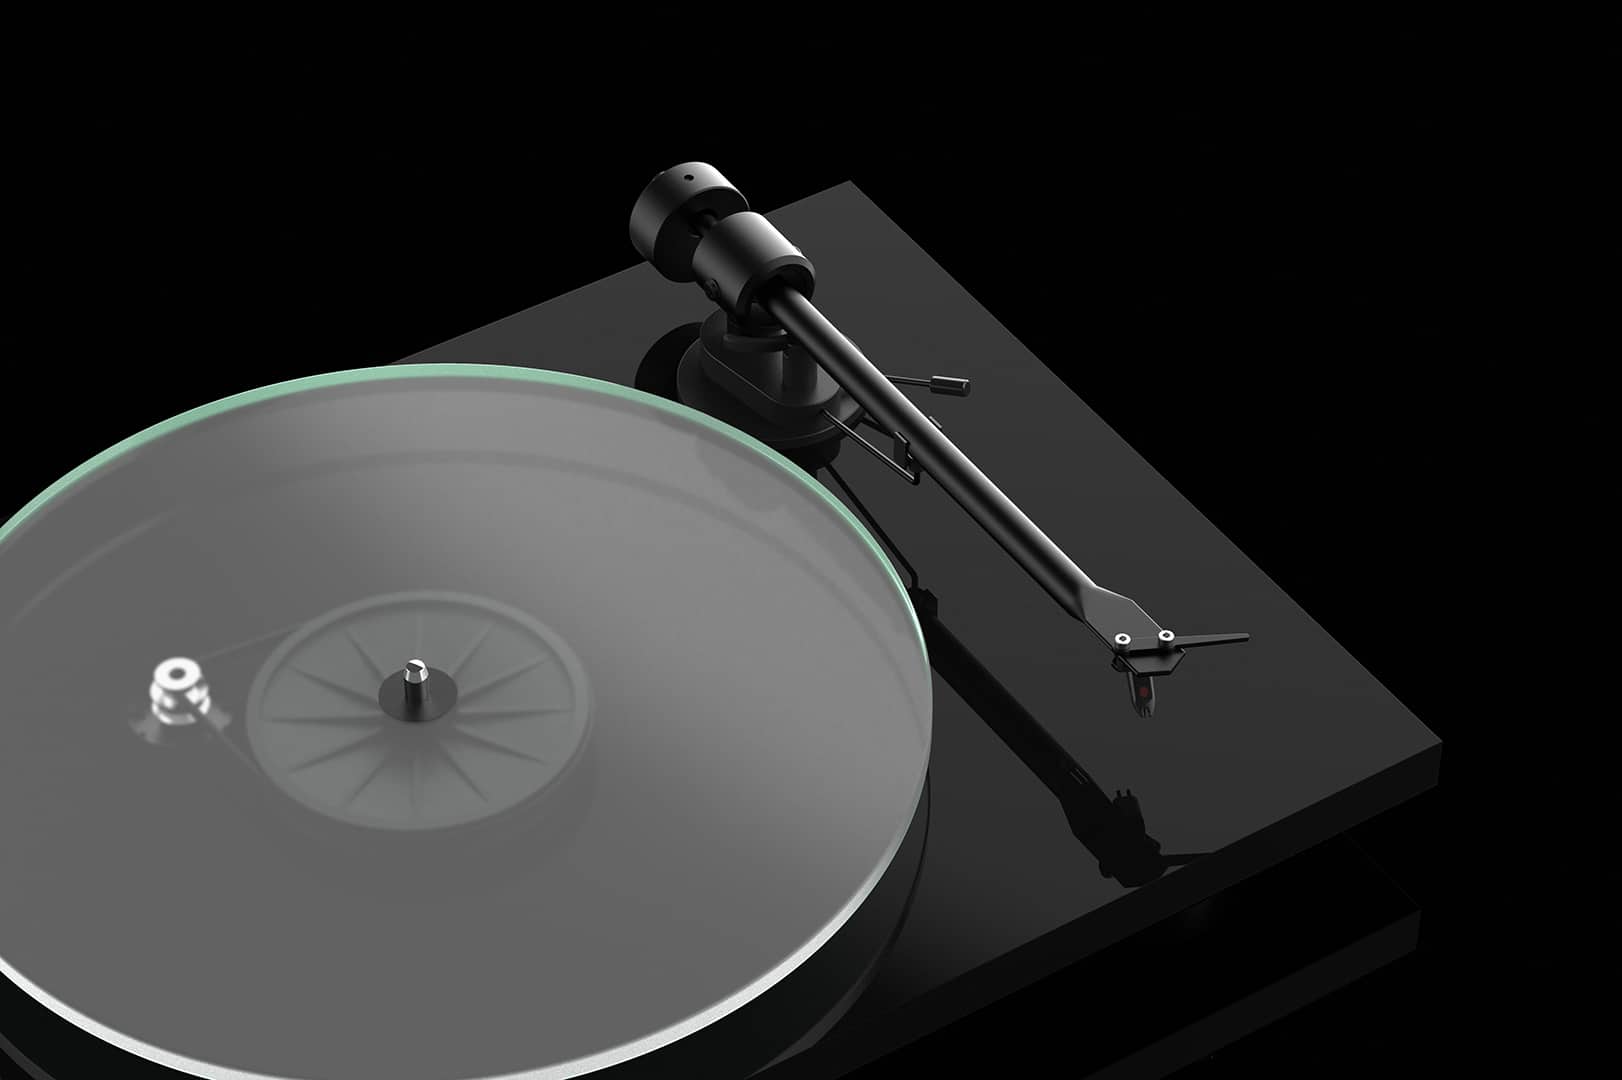 Pro-Ject T1 Phono SB Turntable - Entry Level Turntable